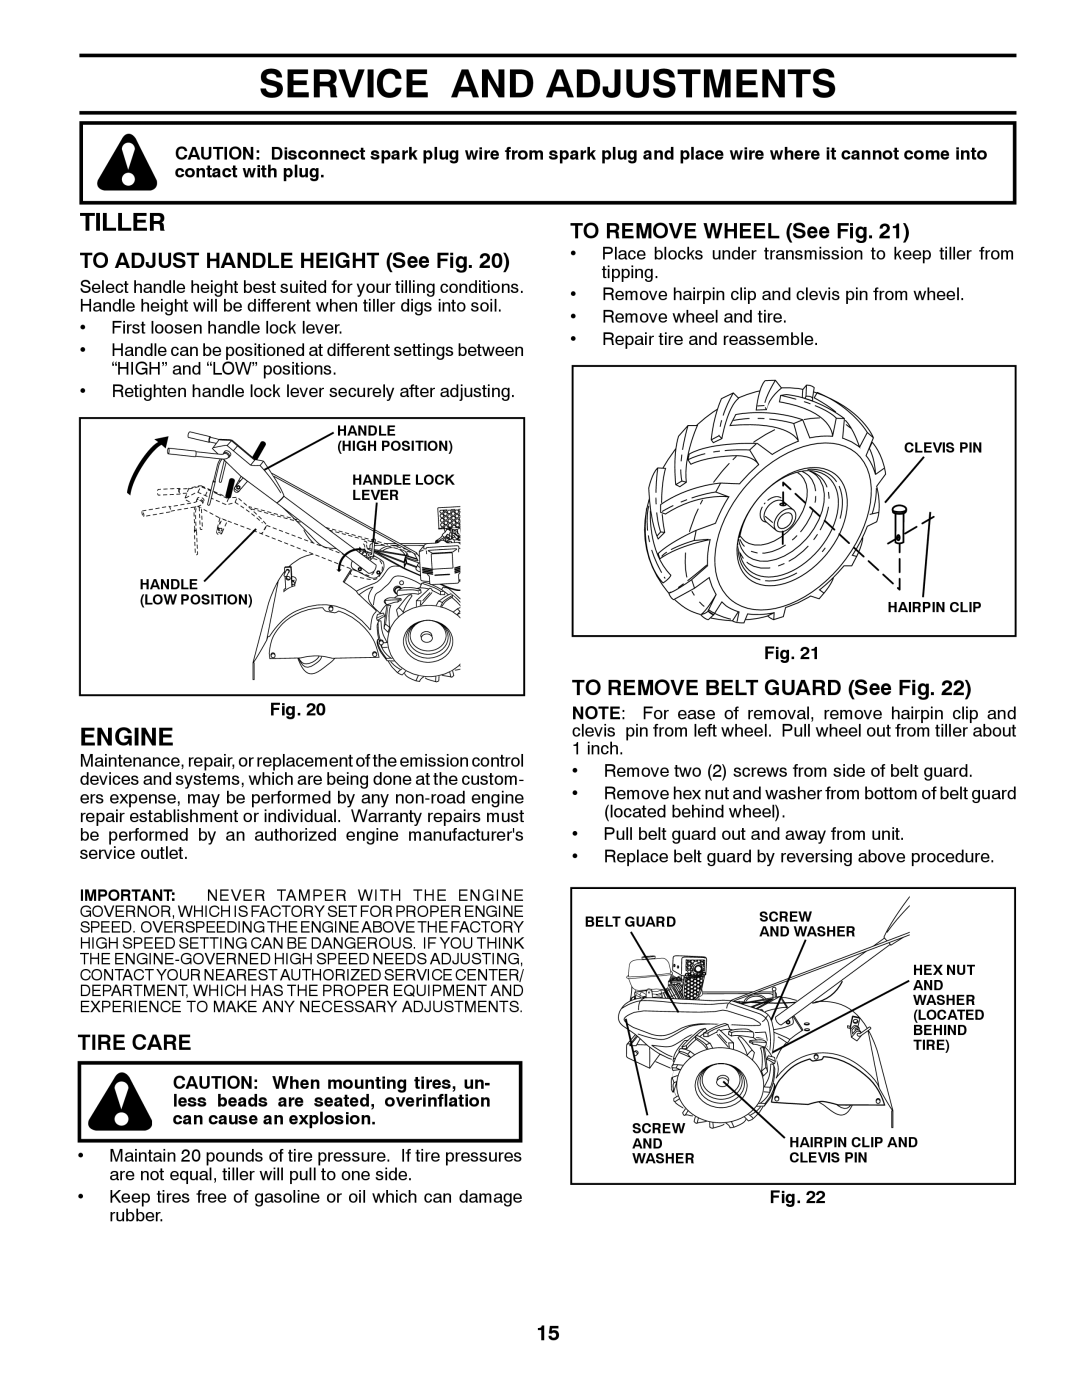 Poulan PRRT900 manual Service And Adjustments, Tiller, TO ADJUST HANDLE HEIGHT See Fig, Tire Care, TO REMOVE WHEEL See Fig 